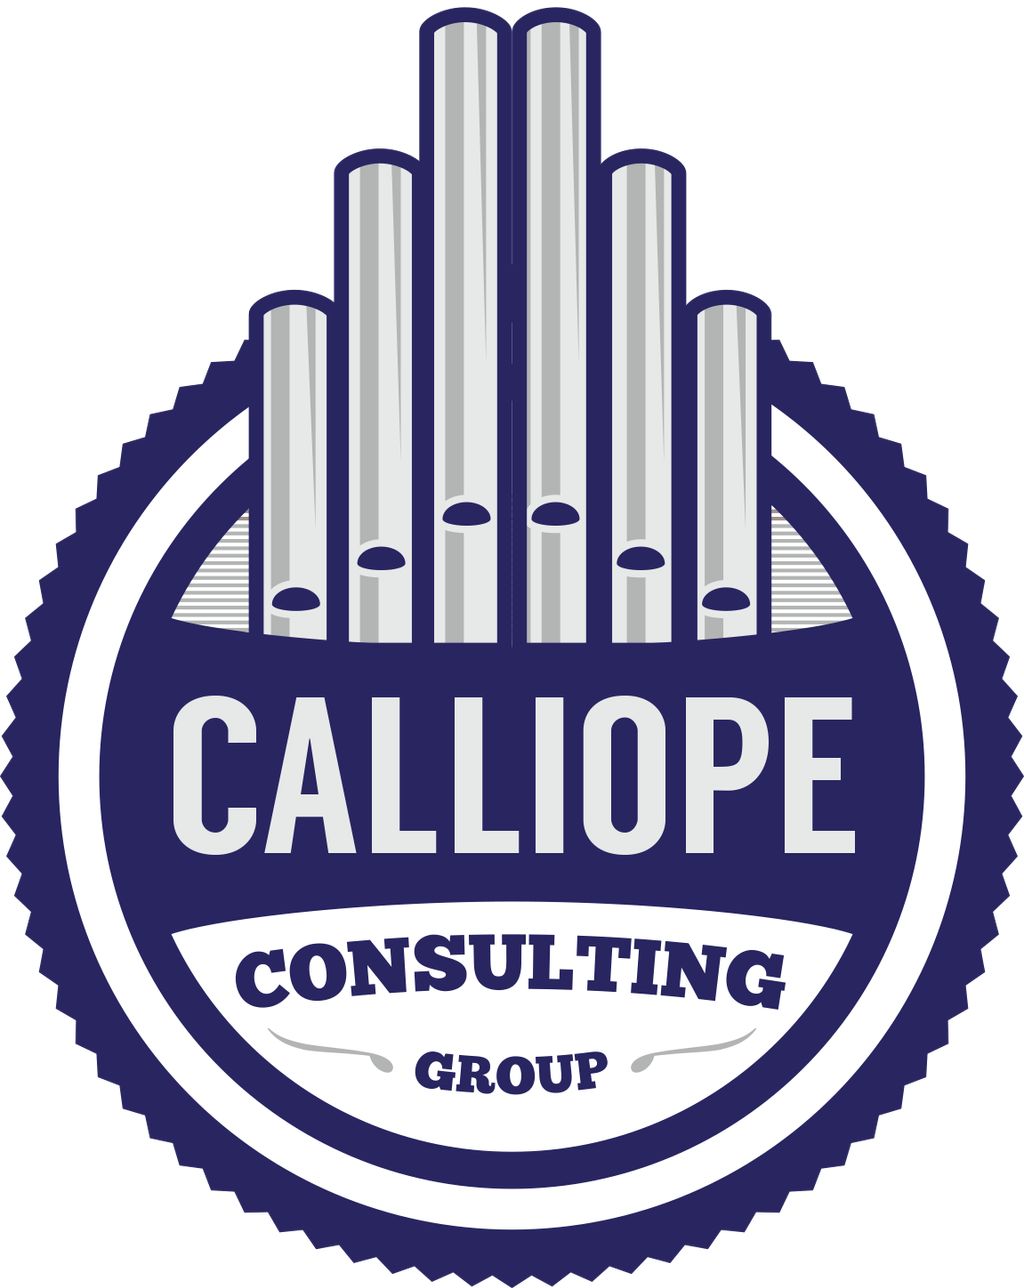 Calliope Consulting Group